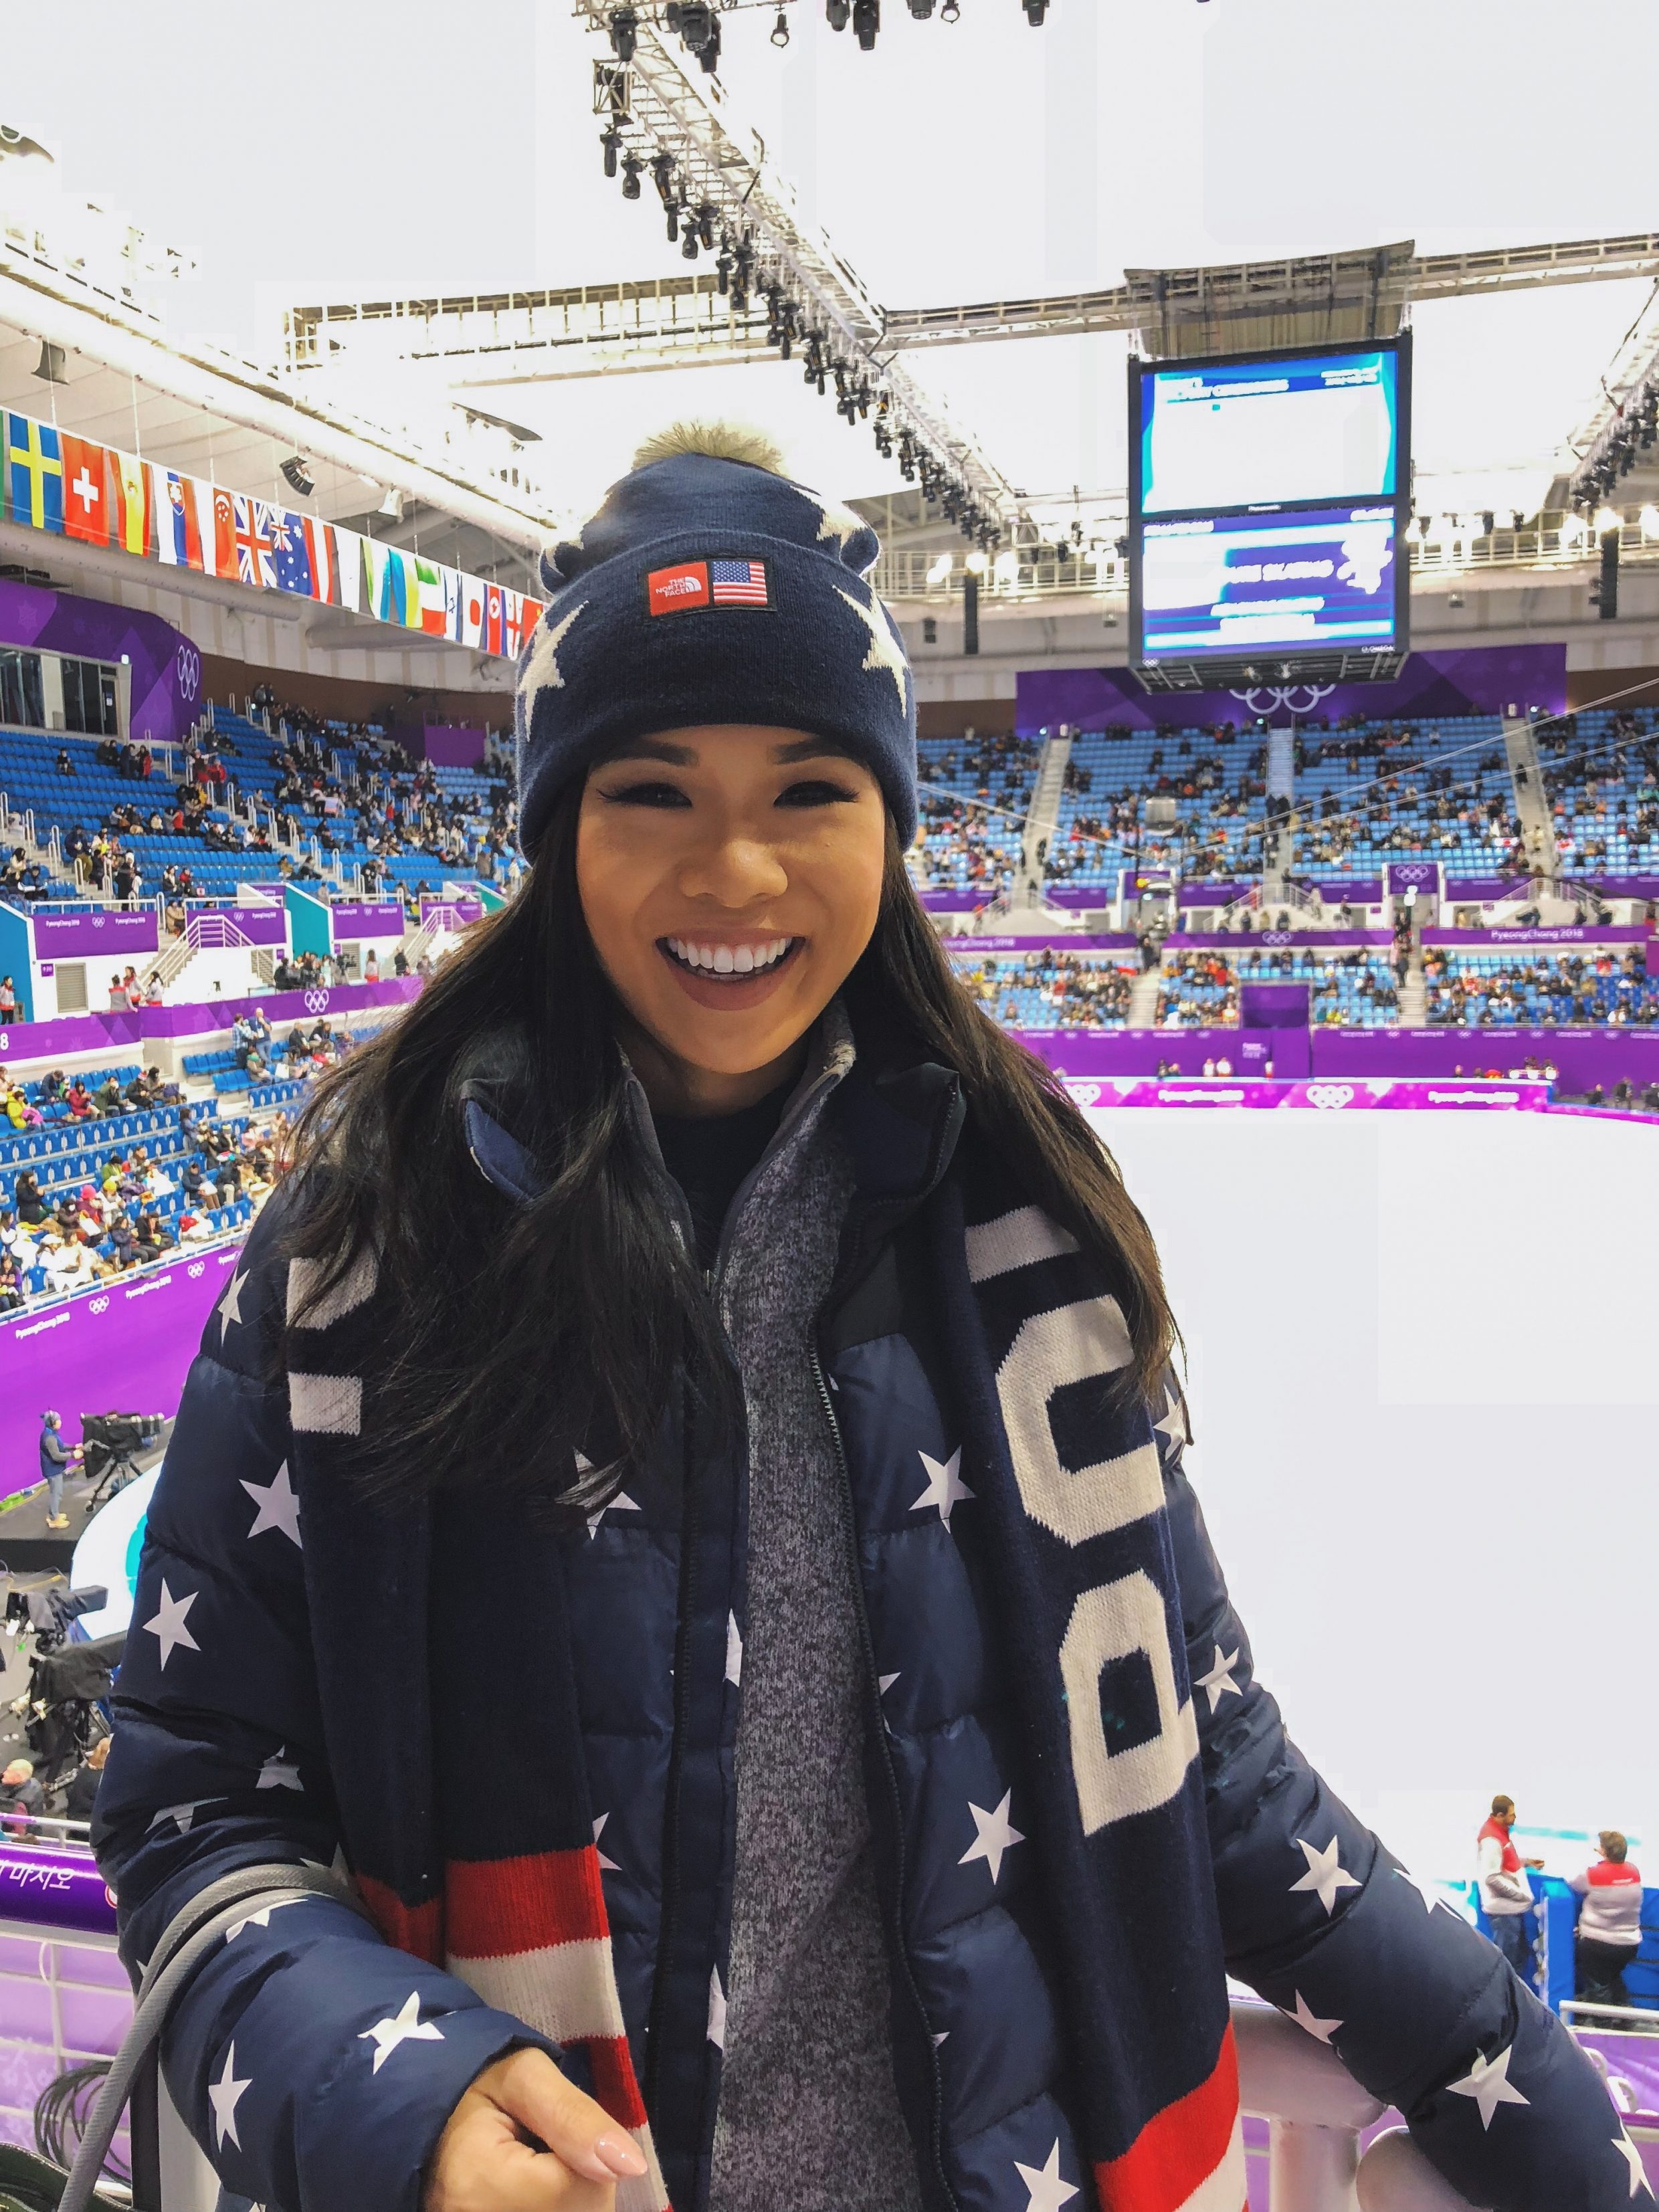 Hoang-Kim wearing The North Face Star Print Team USA Gear inside Gangneung Ice Arena at the PyeongChang 2018 Winter Olympics before the Mens Figure Skating Short Program event